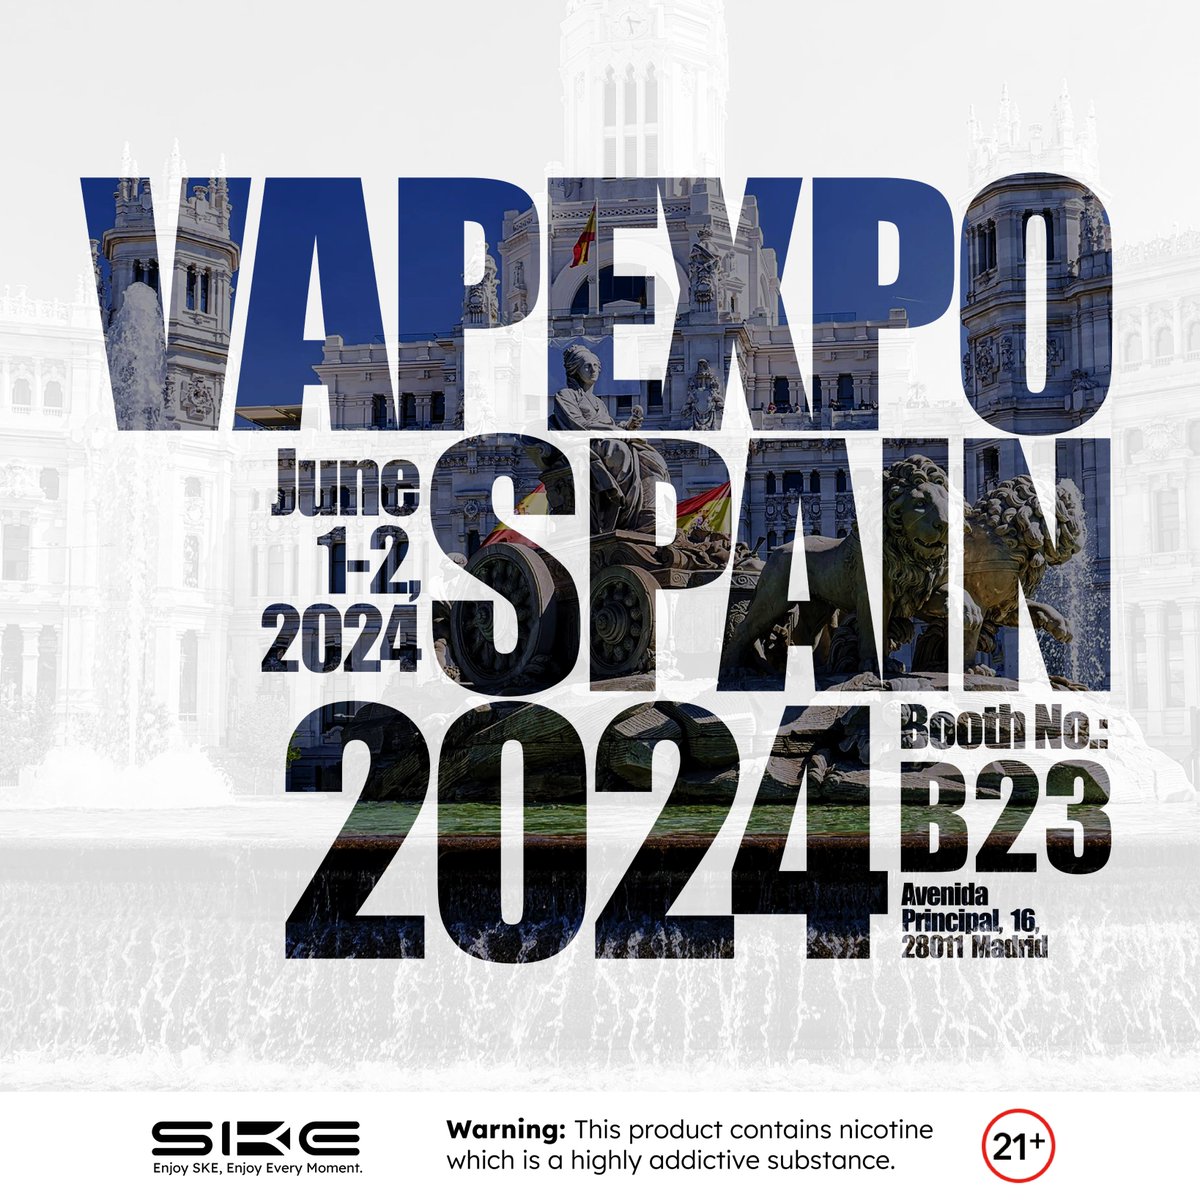 🎉 Get ready to ignite your senses with #SKE at Vapexpo Spain! 🥳 🙌 
Visit us at Booth B23 on June 1-2, 2024, in Madrid, and discover the latest innovations in vaping technology, flavors, and more! 🔥

Warning:  21+
#skevape  #vapefam #vapedaily #skecrystal #vapexpo #vapespain